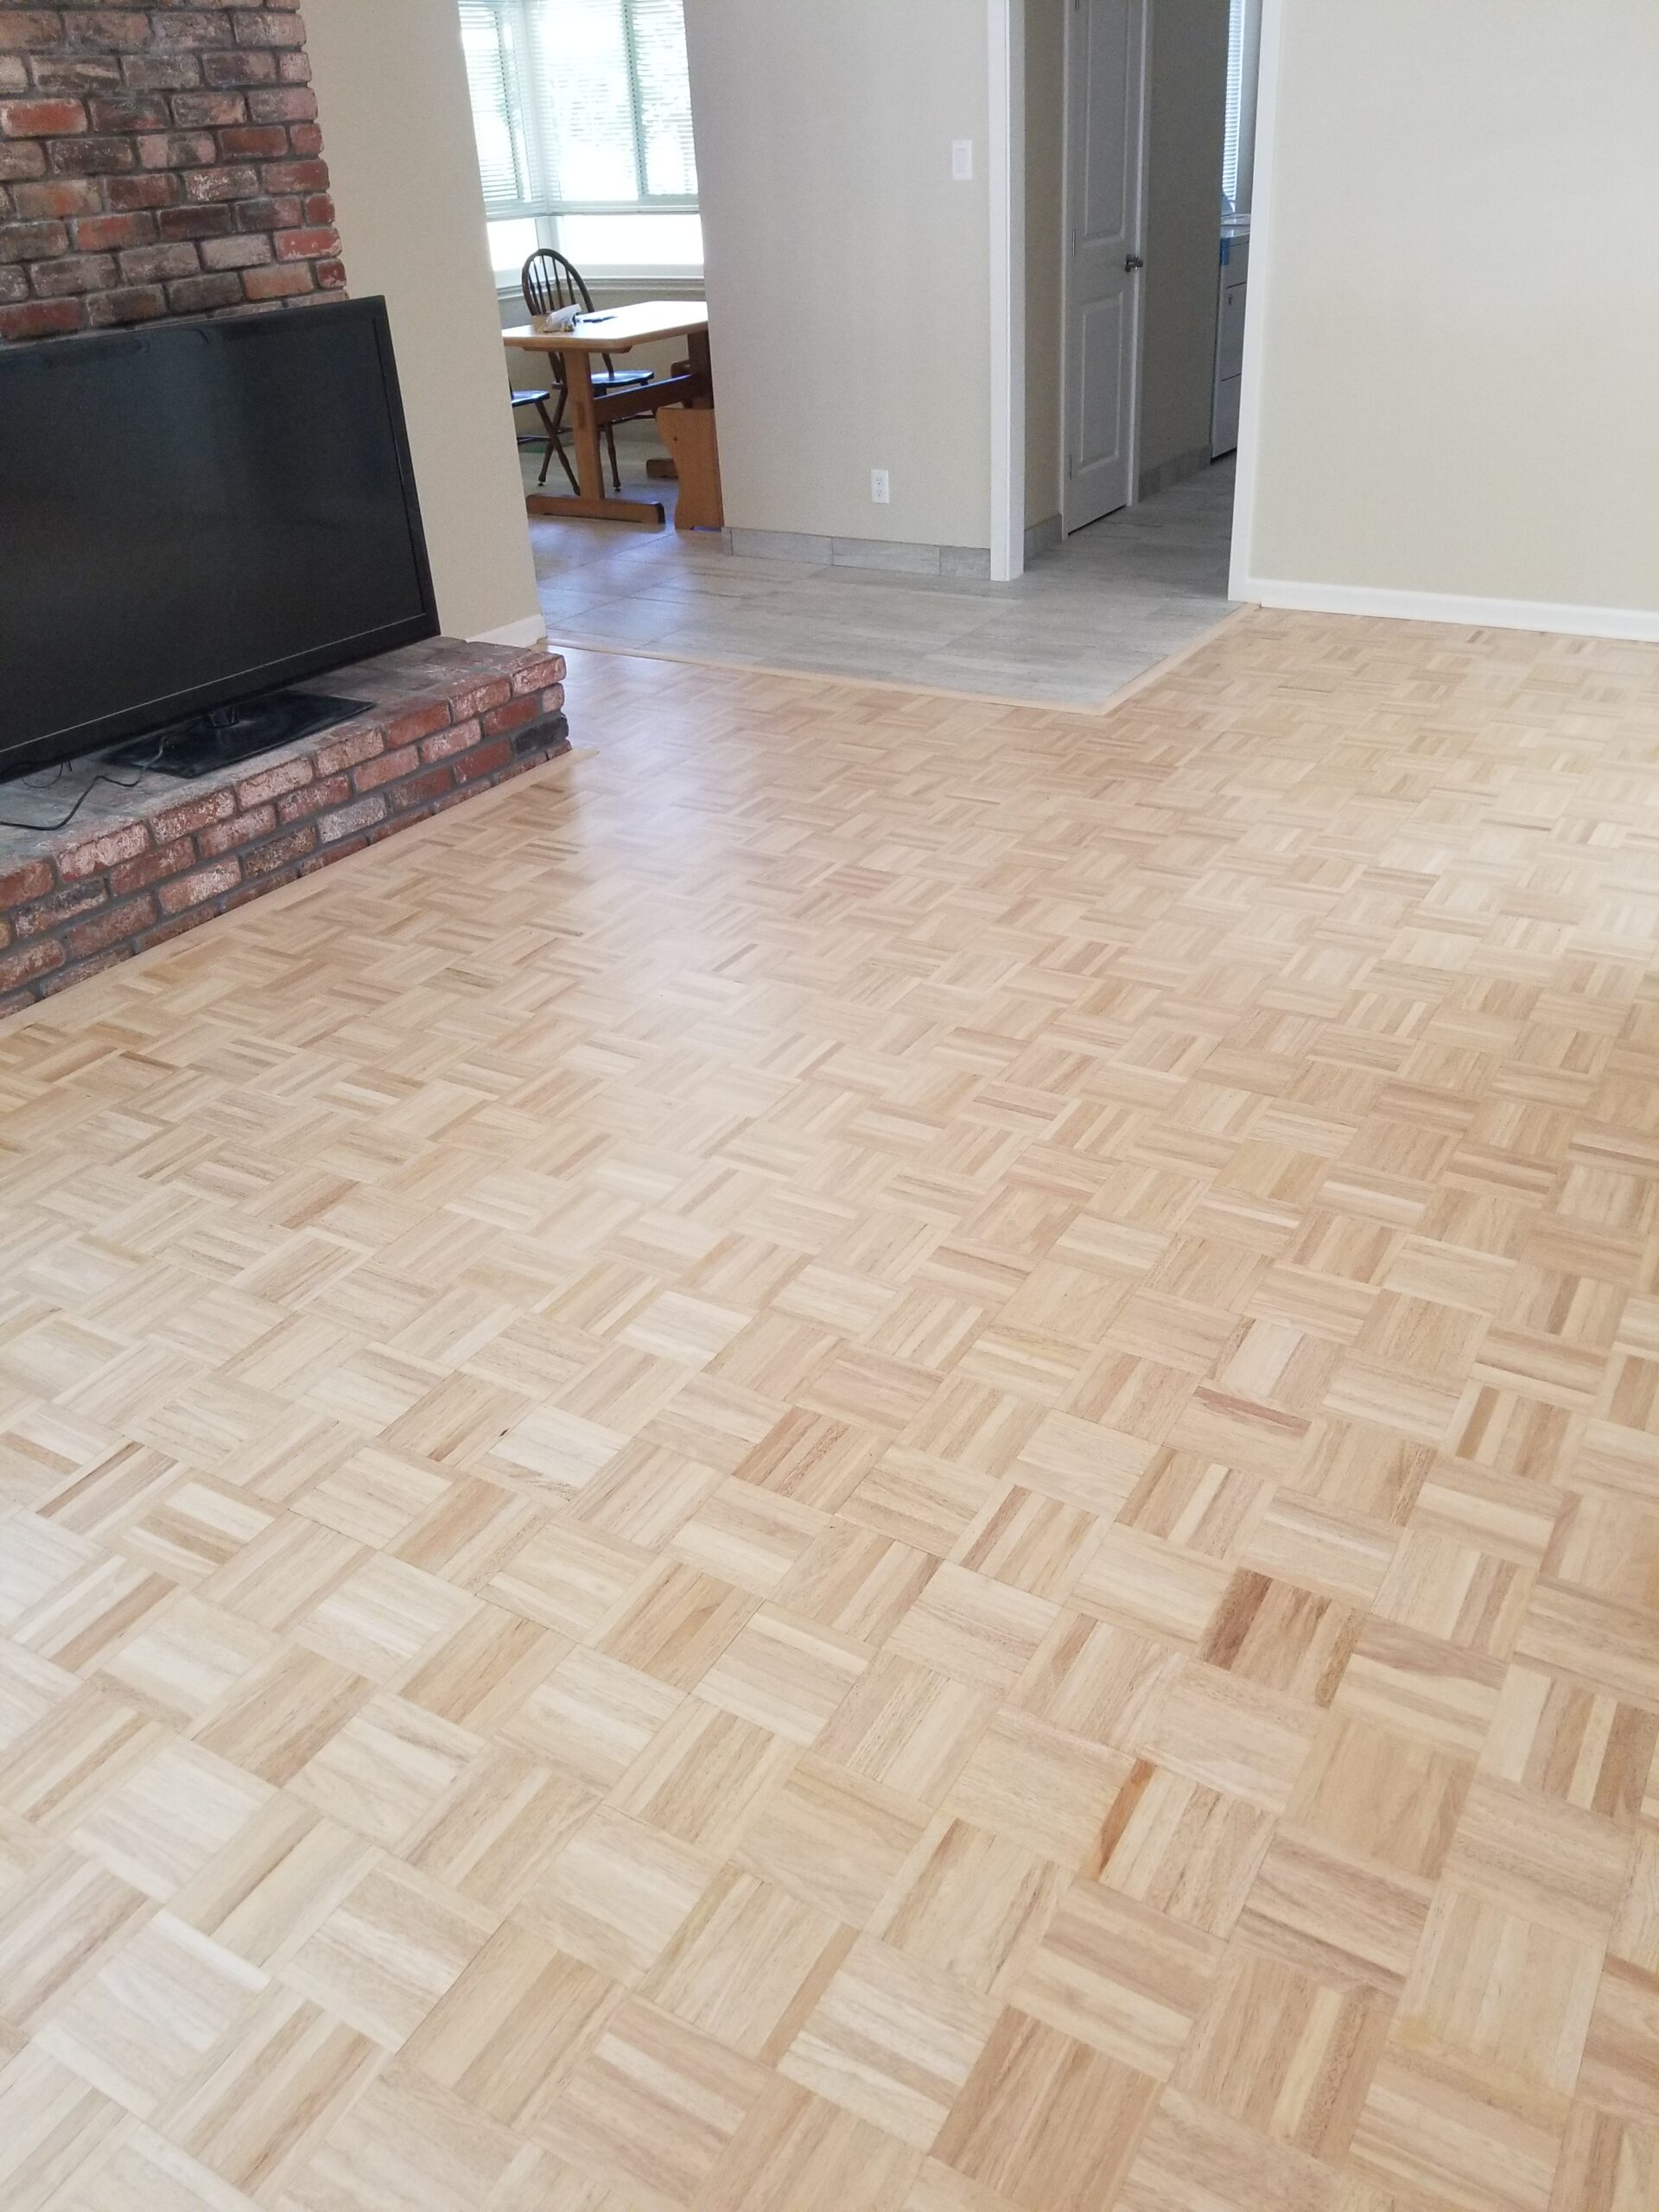 San Jose residential: install beech parquet flooring,with 3 coats of water-base finish, 350 square feet.